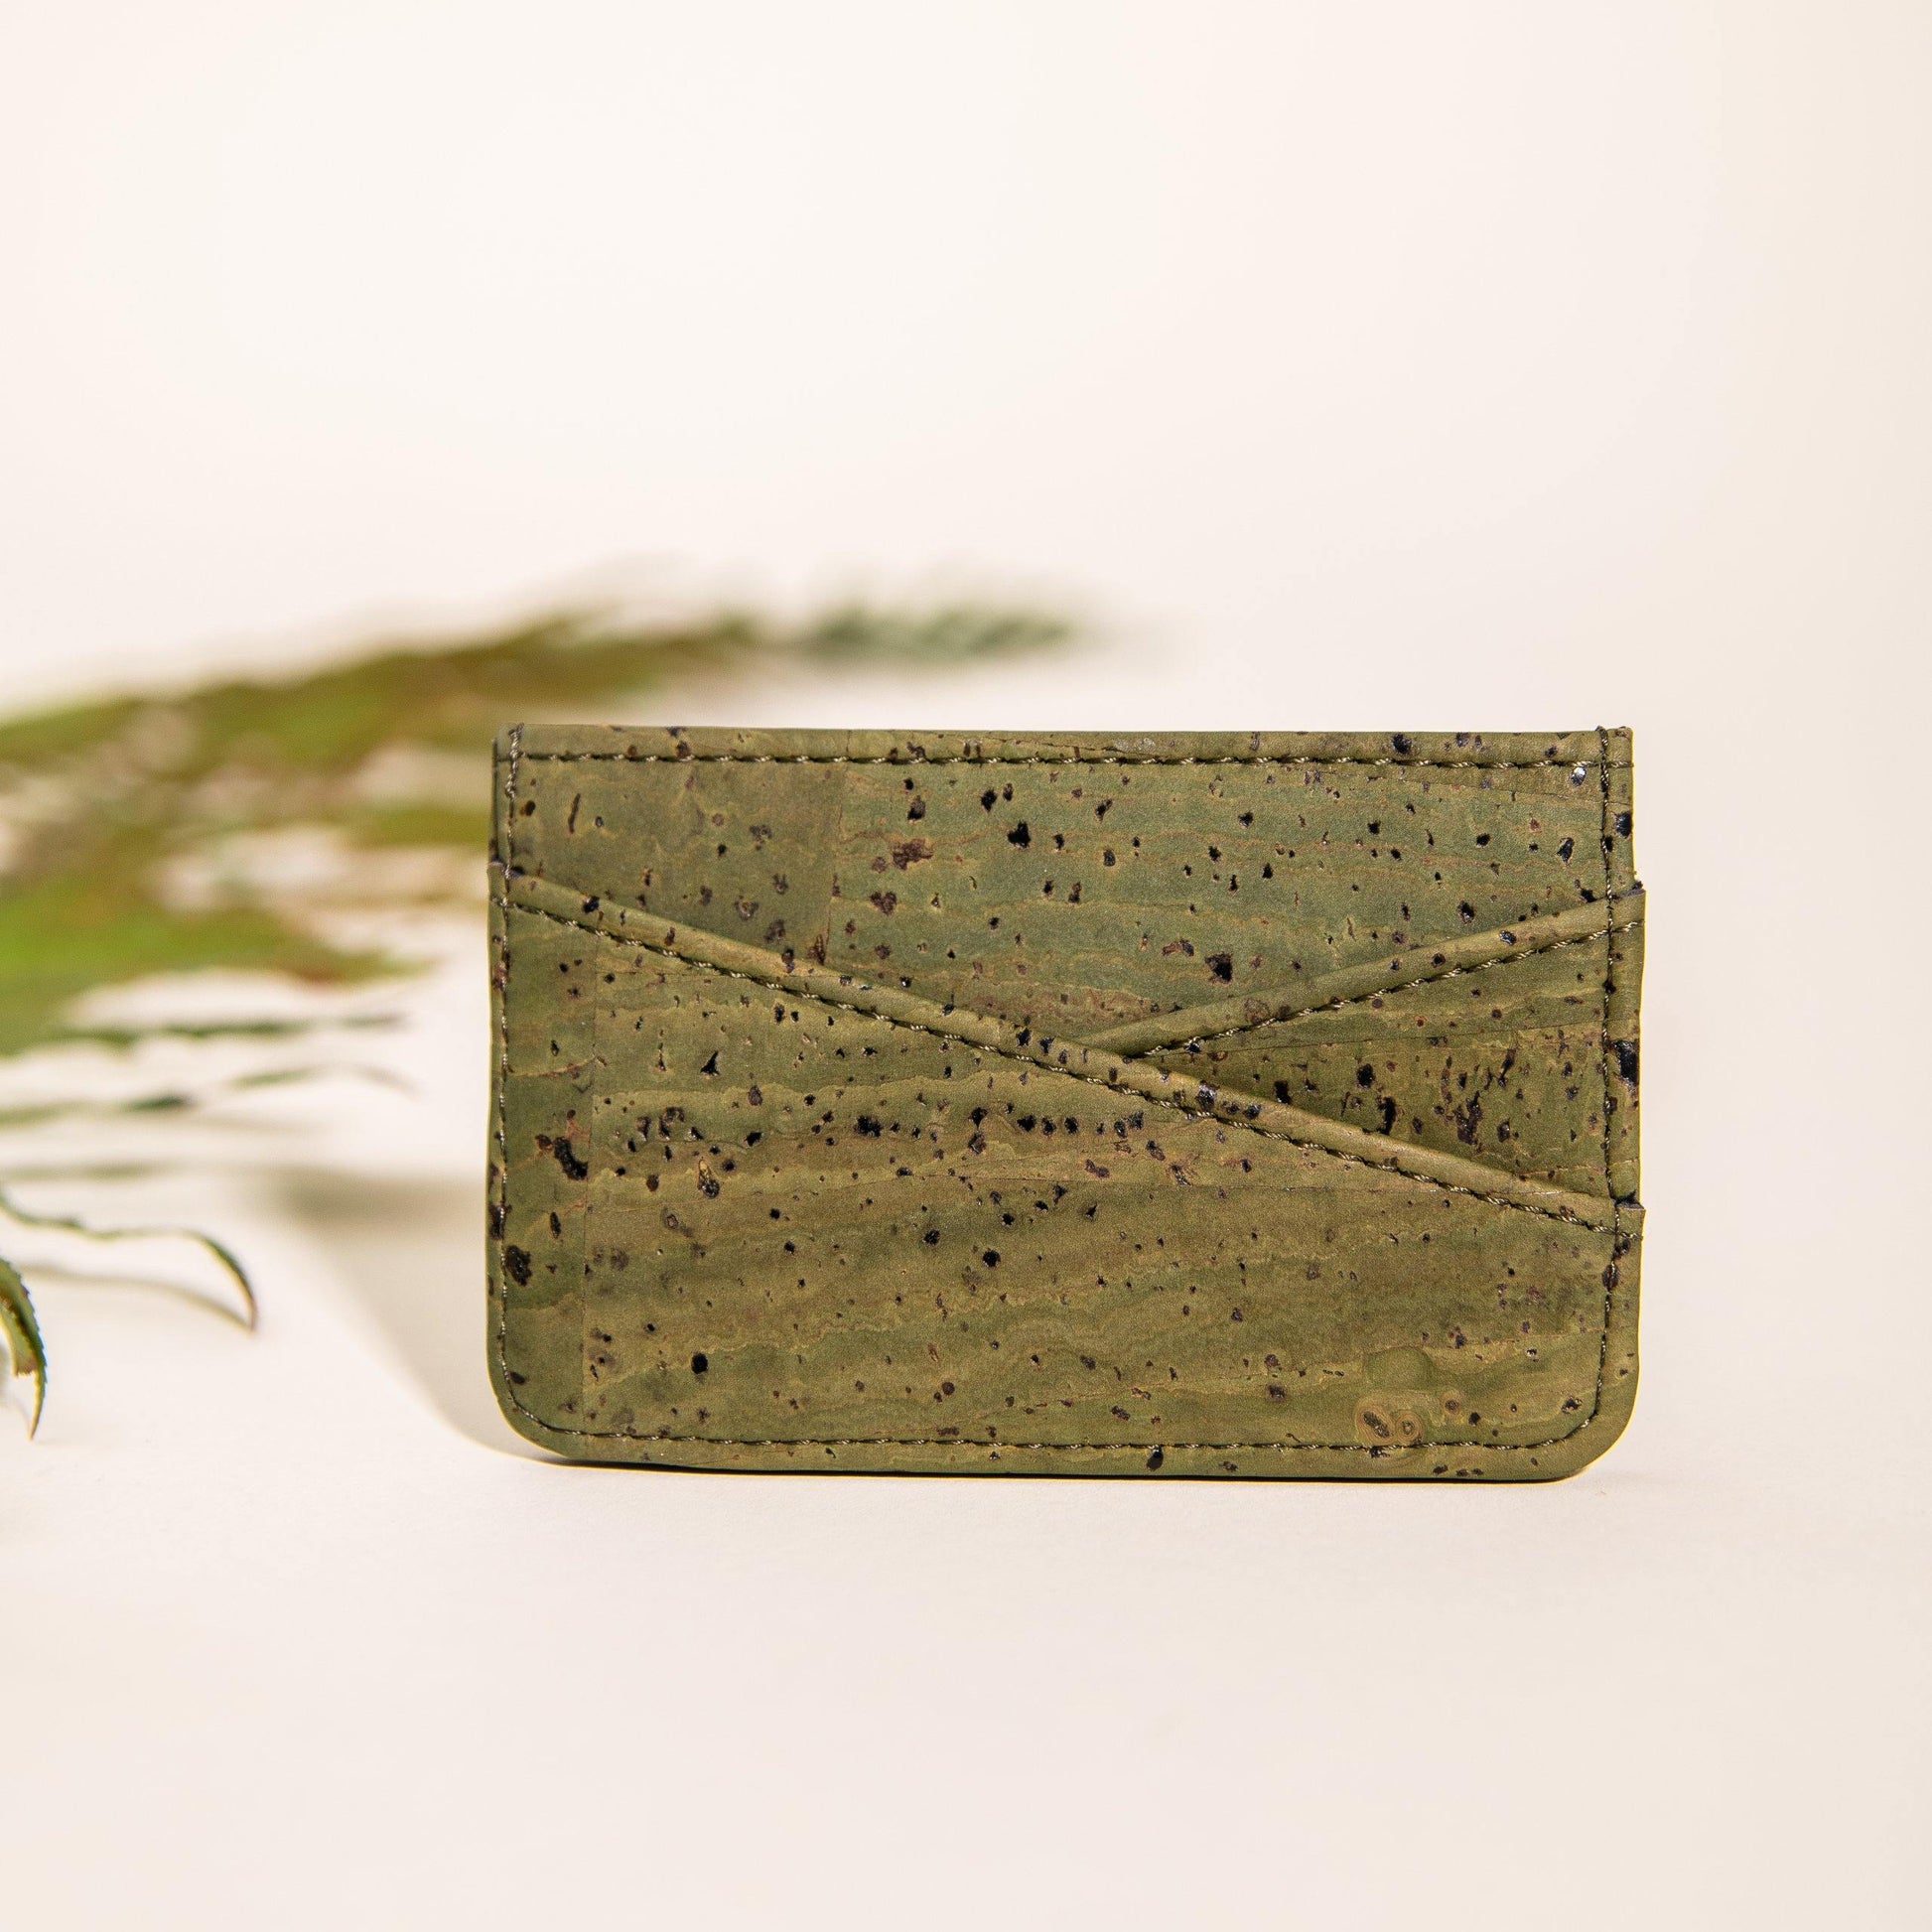 Red Slim Wallet - Handmade from Leaf Leather, Minimalist Style